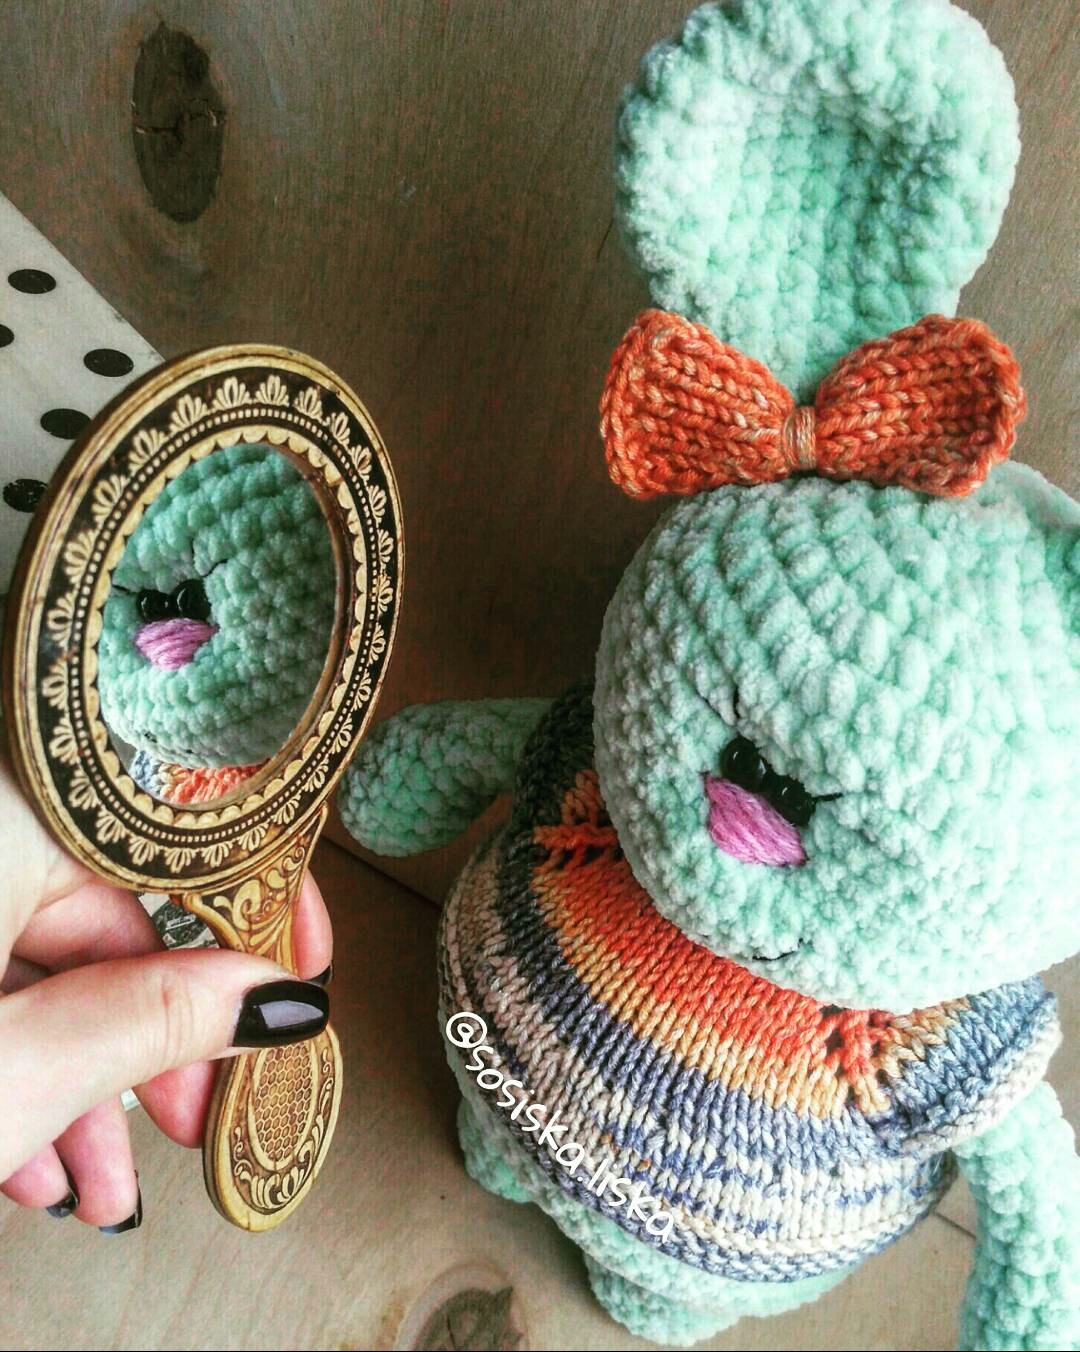 Bunny Mint - Longpost, The 14th of February, Presents, Handmade, Handmade, Toys, Needlework, With your own hands, My